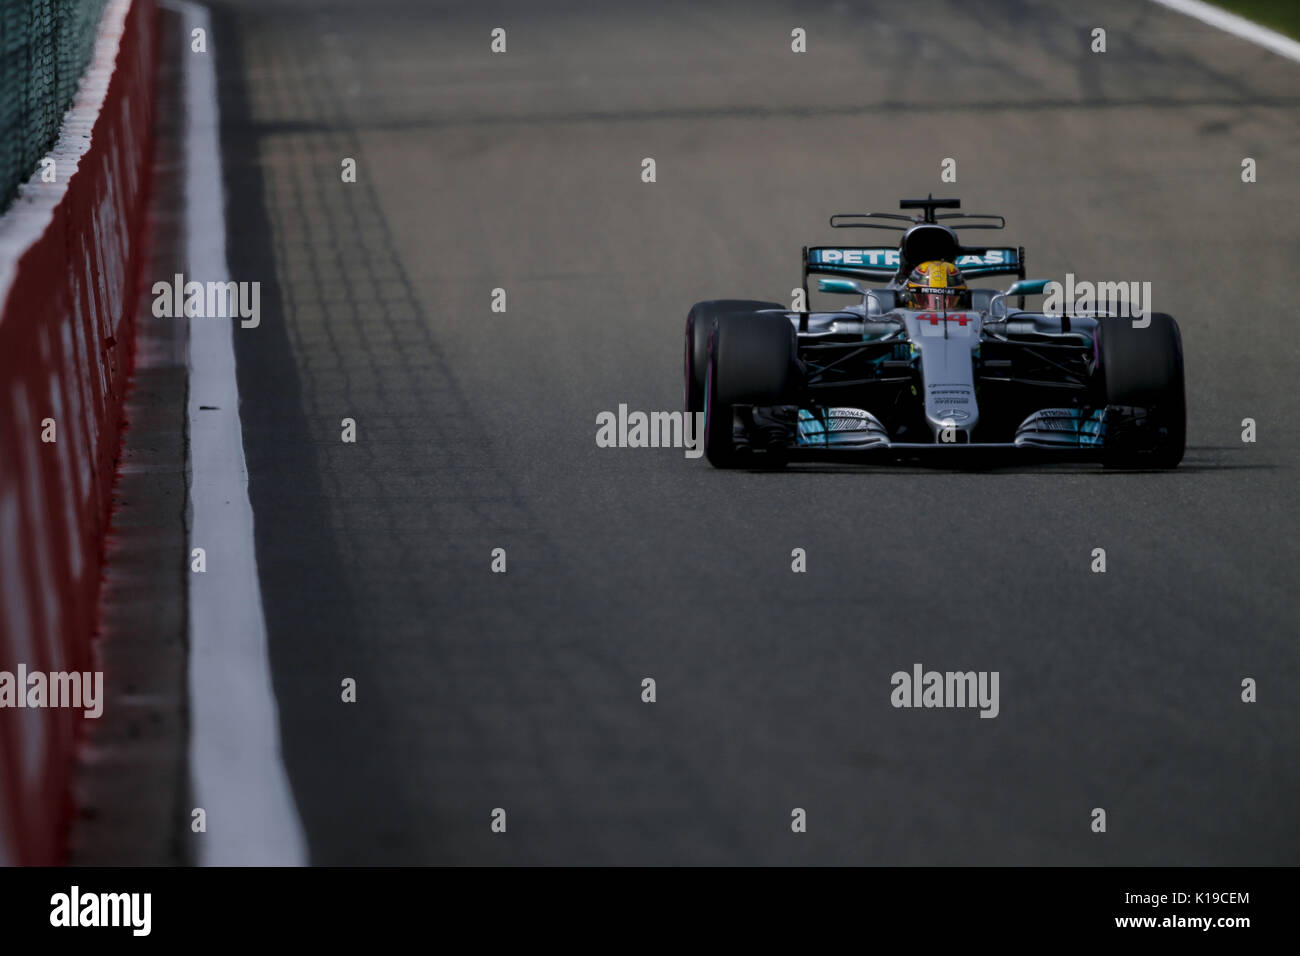 Francorchamps, Belgium. 26th Aug, 2017. LEWIS HAMILTON of Great Britain and Mercedes AMG Petronas F1 Team drives during the qualifying session of the 2017 Formula 1 Belgian Grand Prix in Francorchamps, Belgium. Credit: James Gasperotti/ZUMA Wire/Alamy Live News Stock Photo